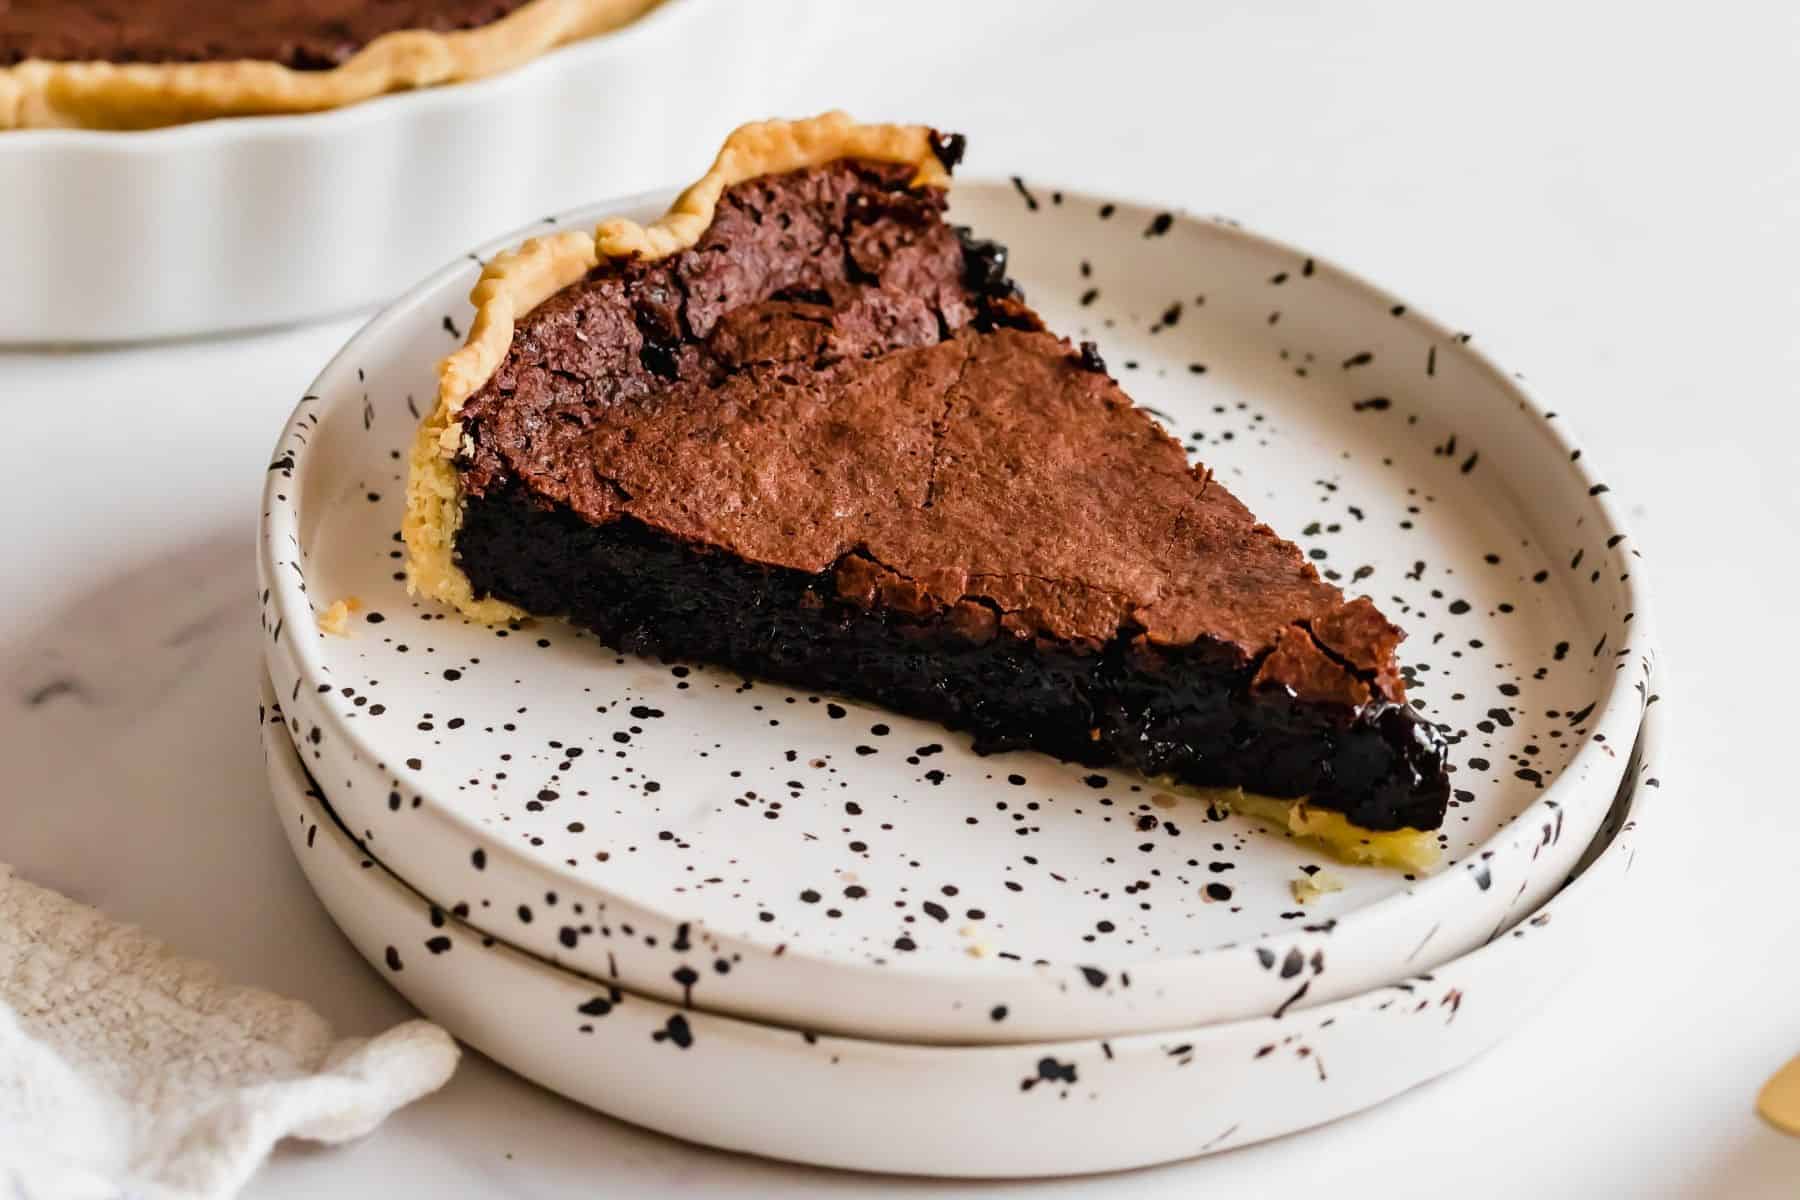 A slice of gluten free chocolate chess pie on a white plate with black speckles.